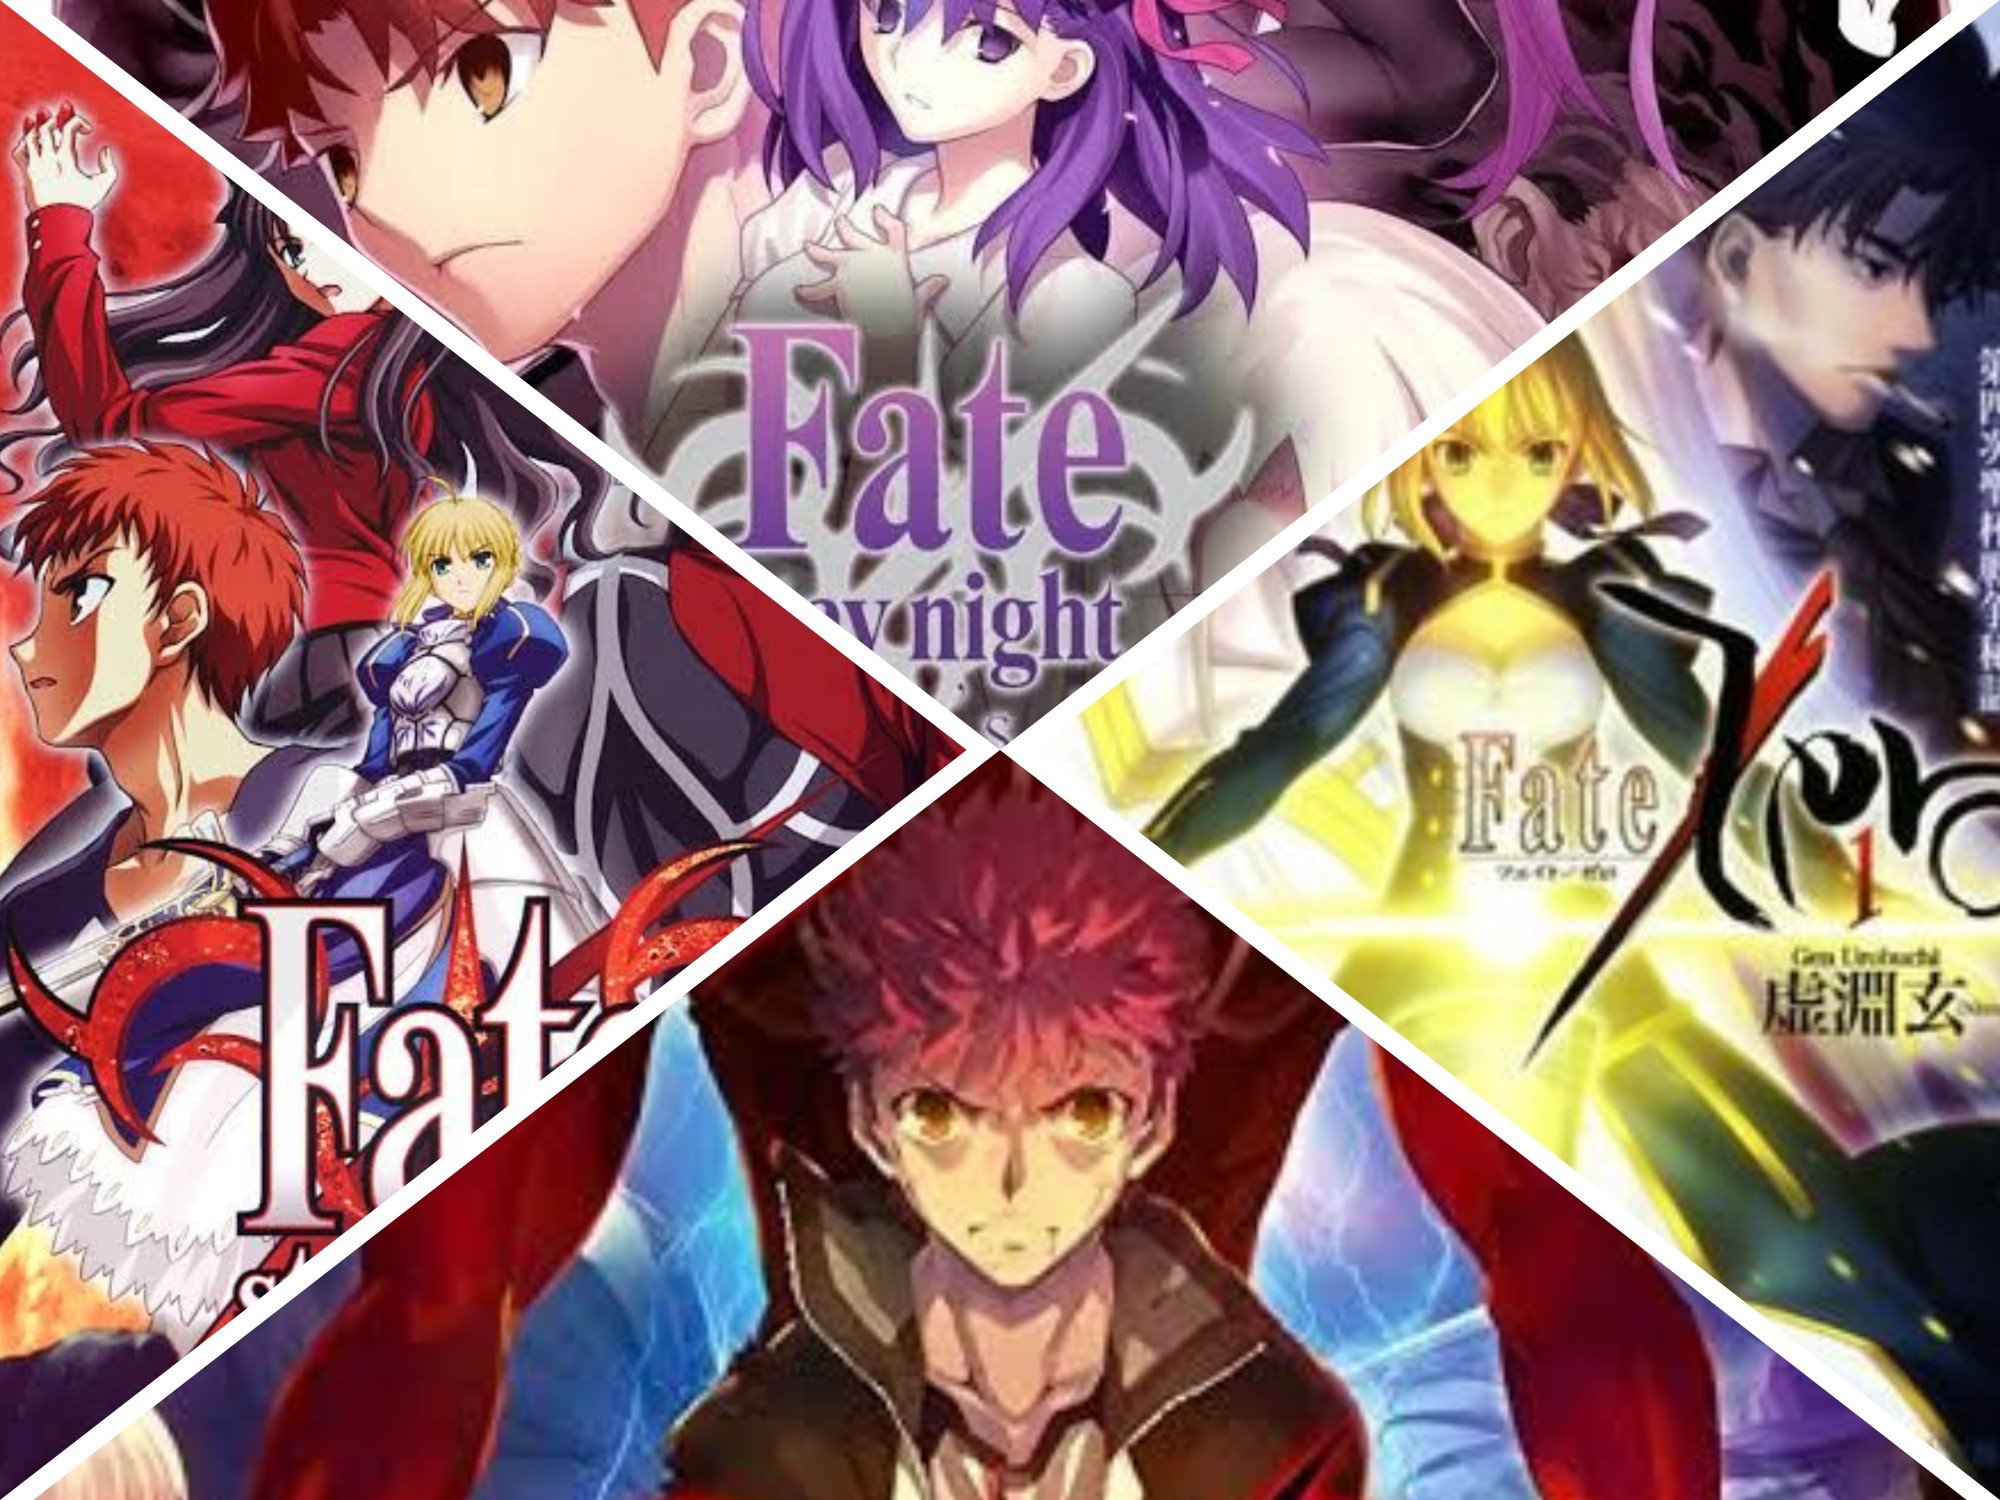 Proper Order To Watch Fate/ Anime Series